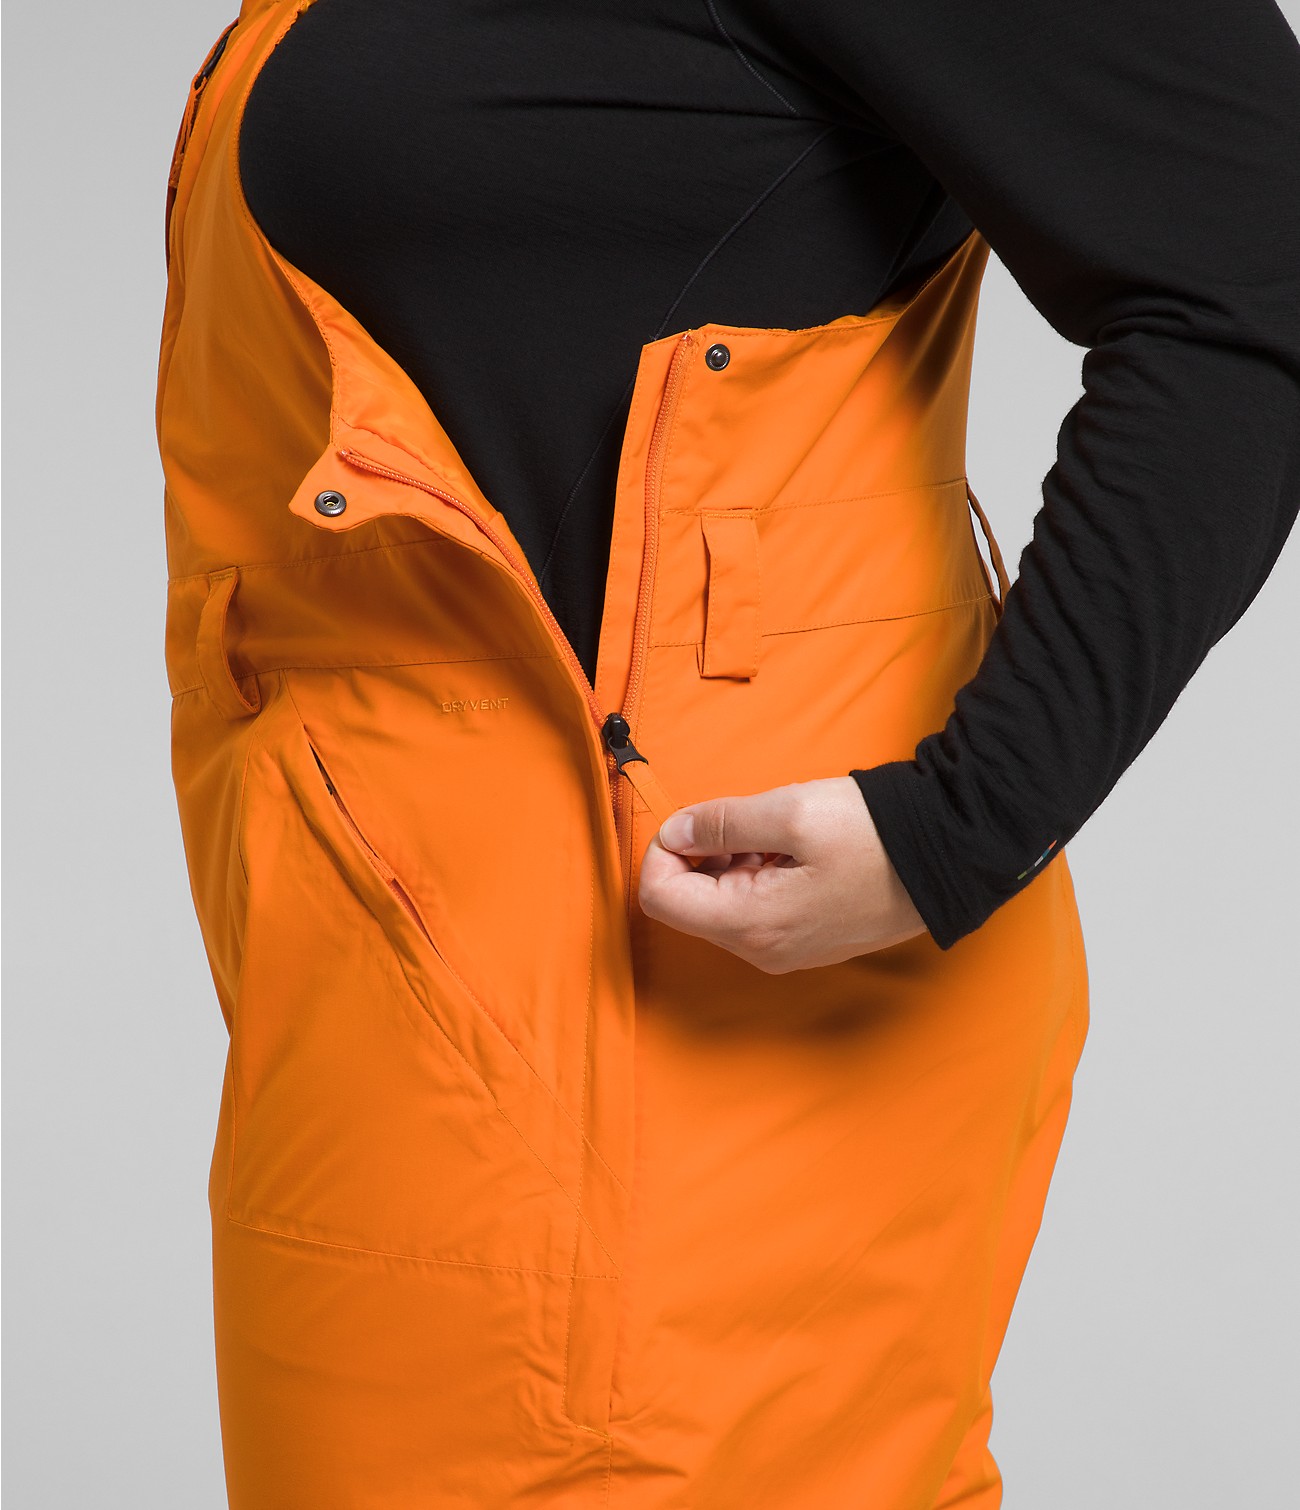 Women’s Plus Freedom Bibs | The North Face